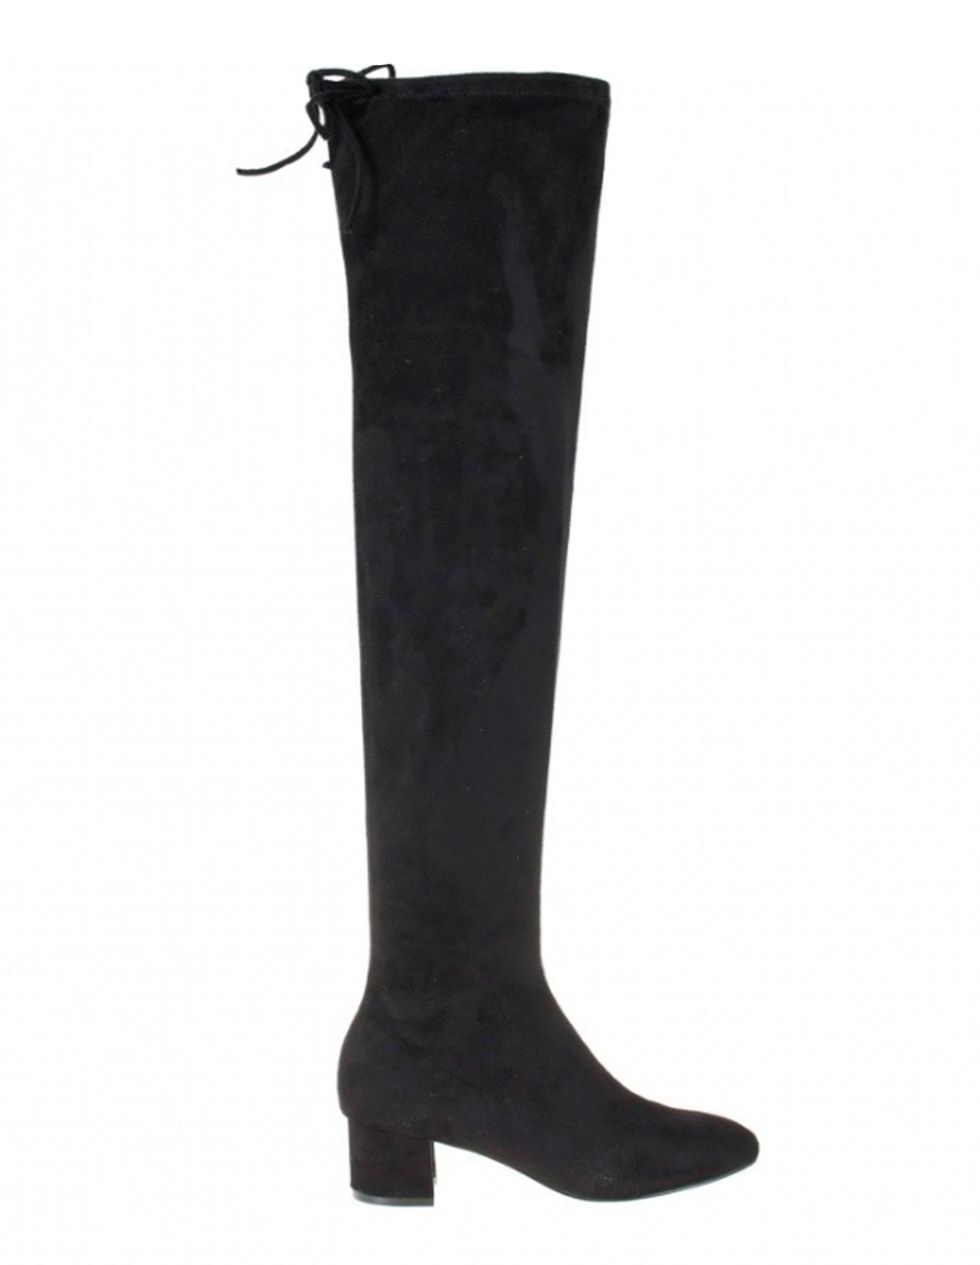 Boot, Costume accessory, Knee-high boot, Black, Riding boot, Leather, 